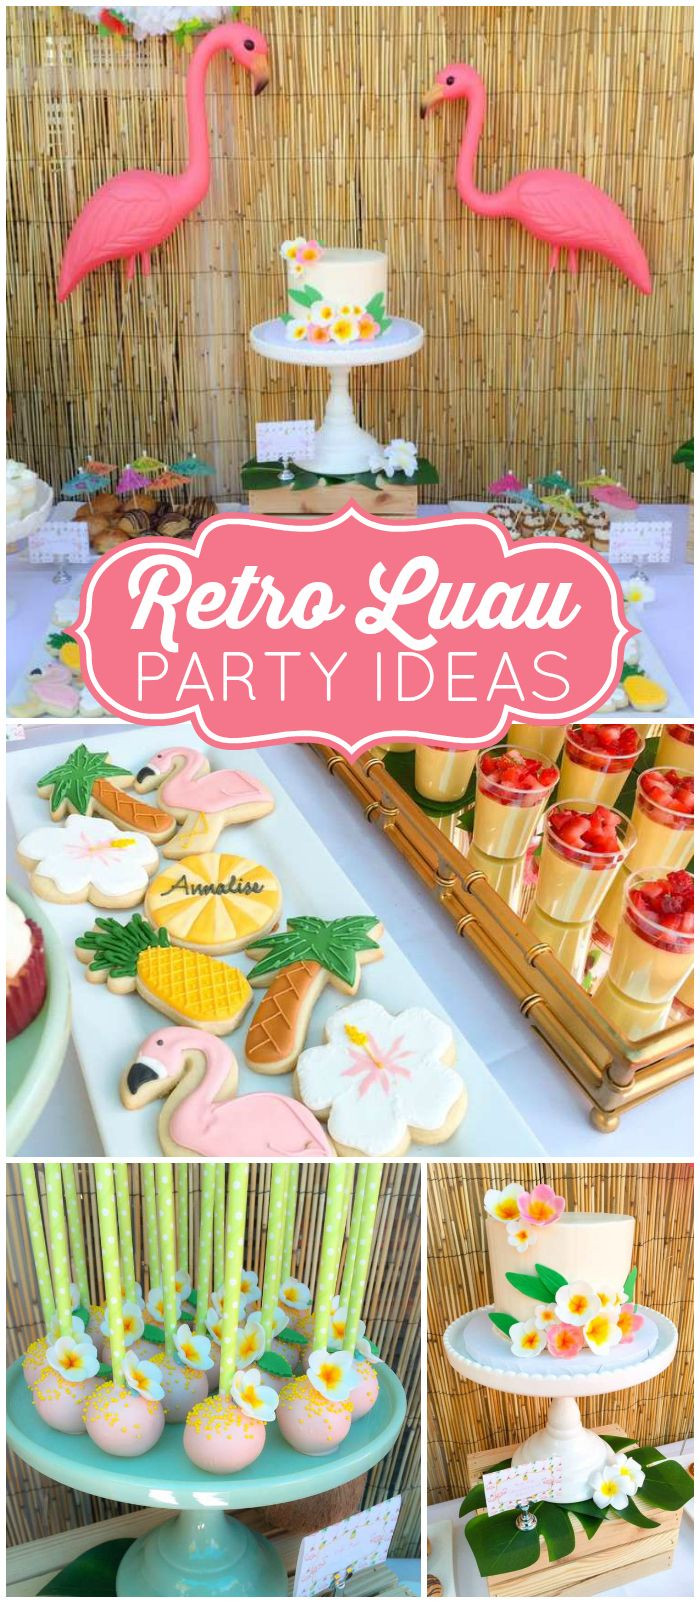 Summer Themed Party Ideas
 Best 25 Summer party themes ideas on Pinterest